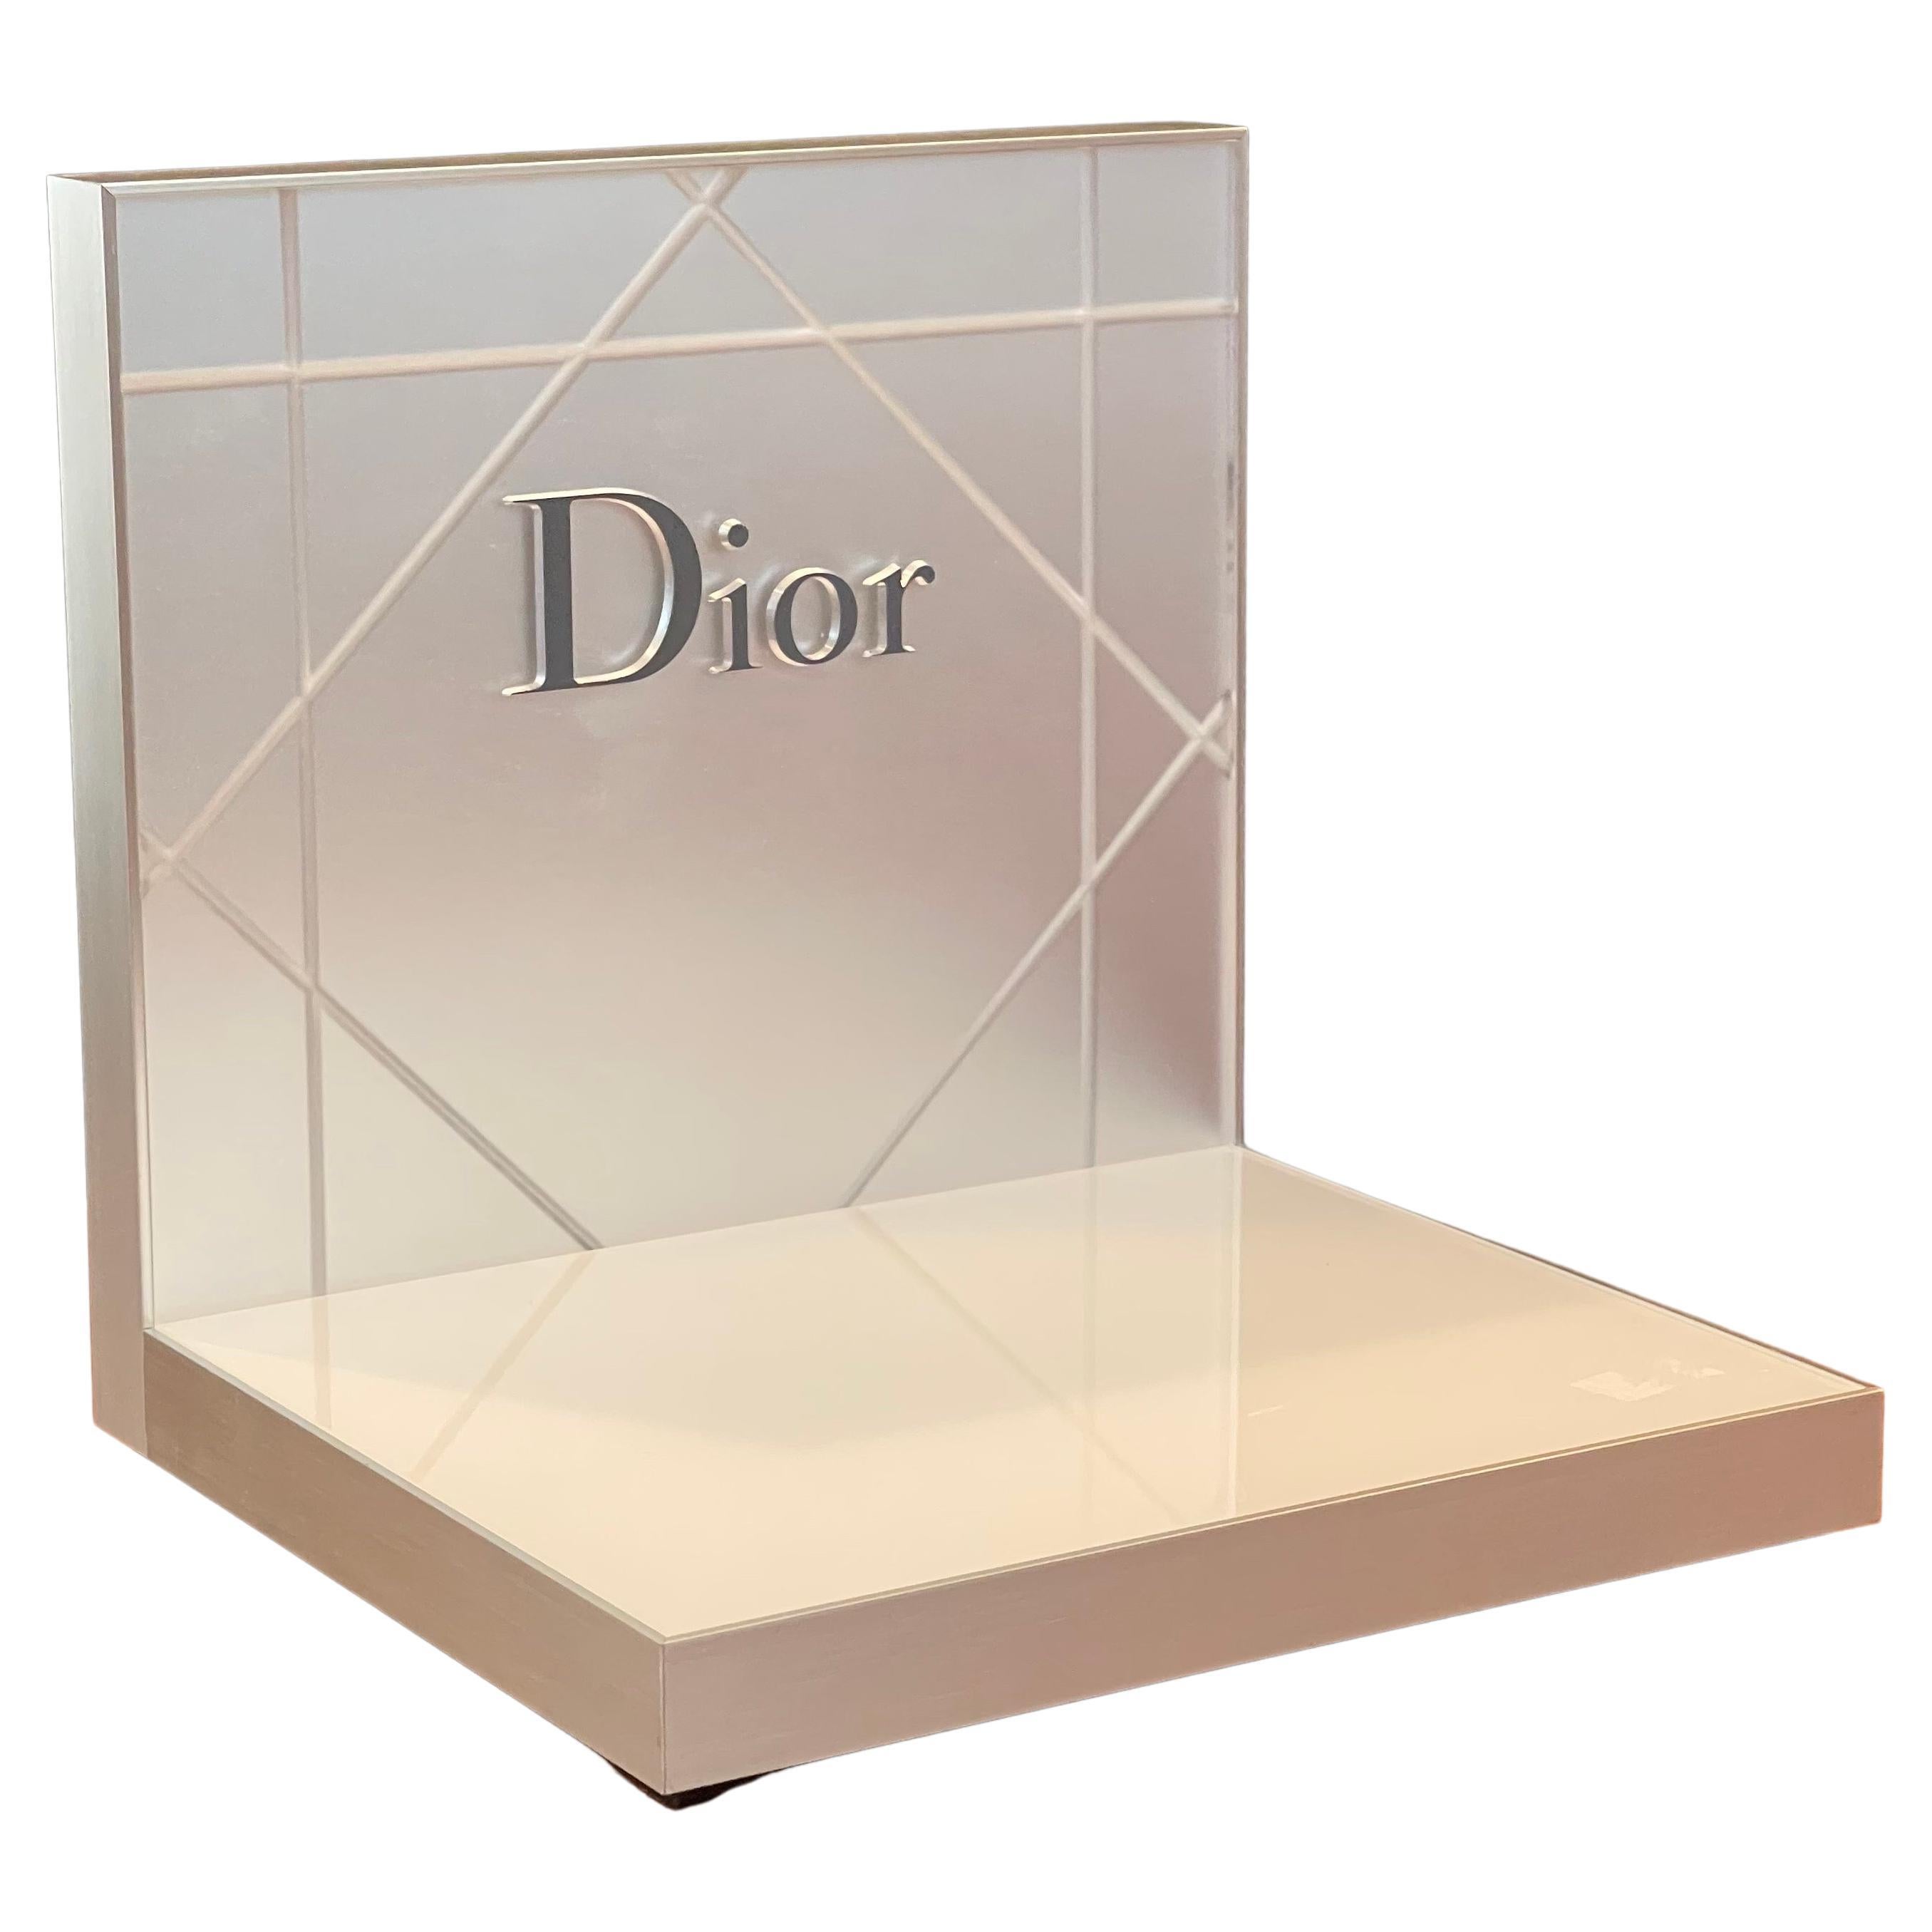 Stylish "Dior" Store Display  For Sale